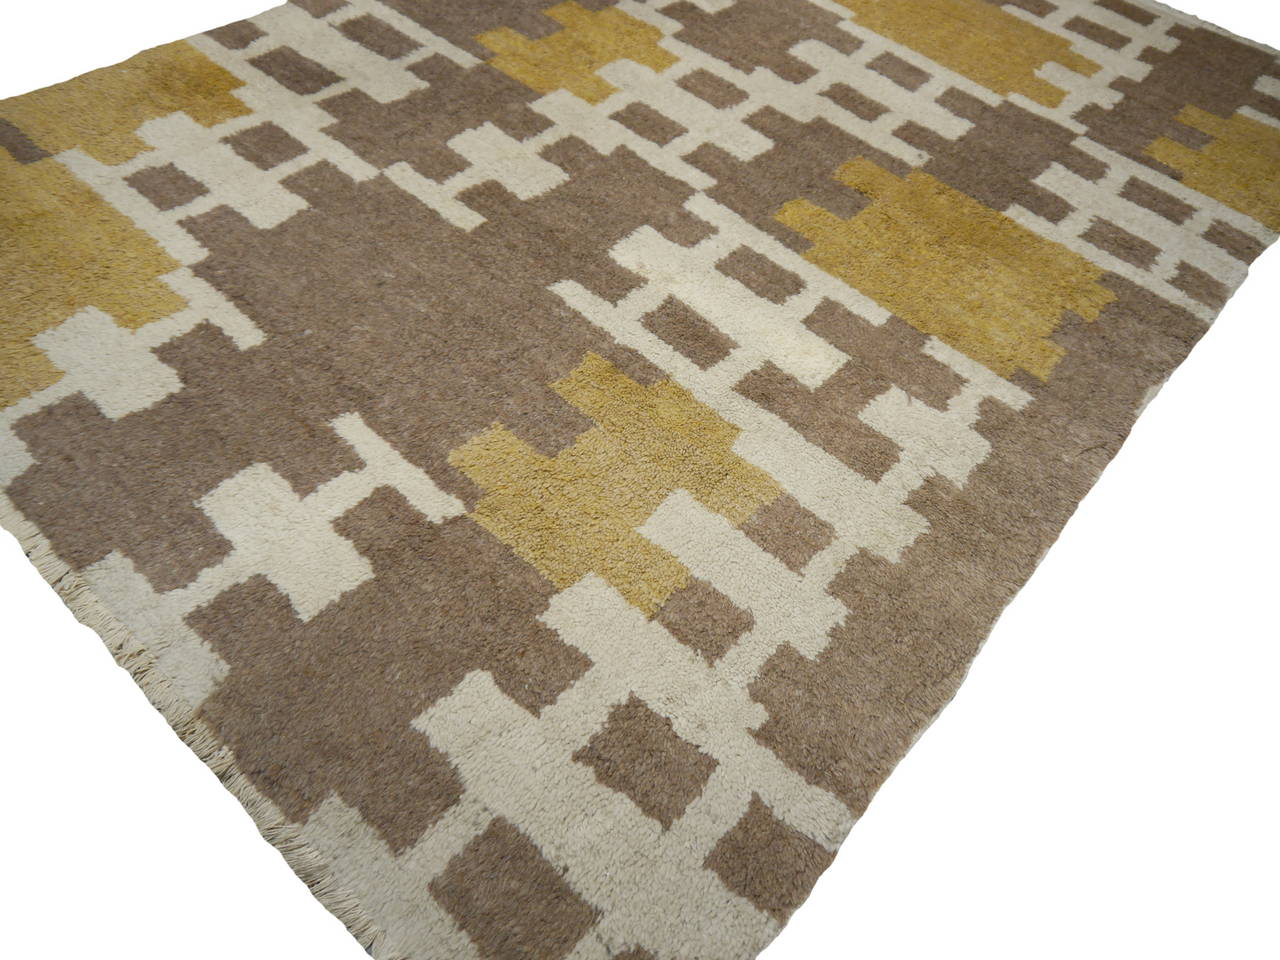 Modernist Berber rug, very unusual design. Made early third quarter of the 20th century. Very good condition.